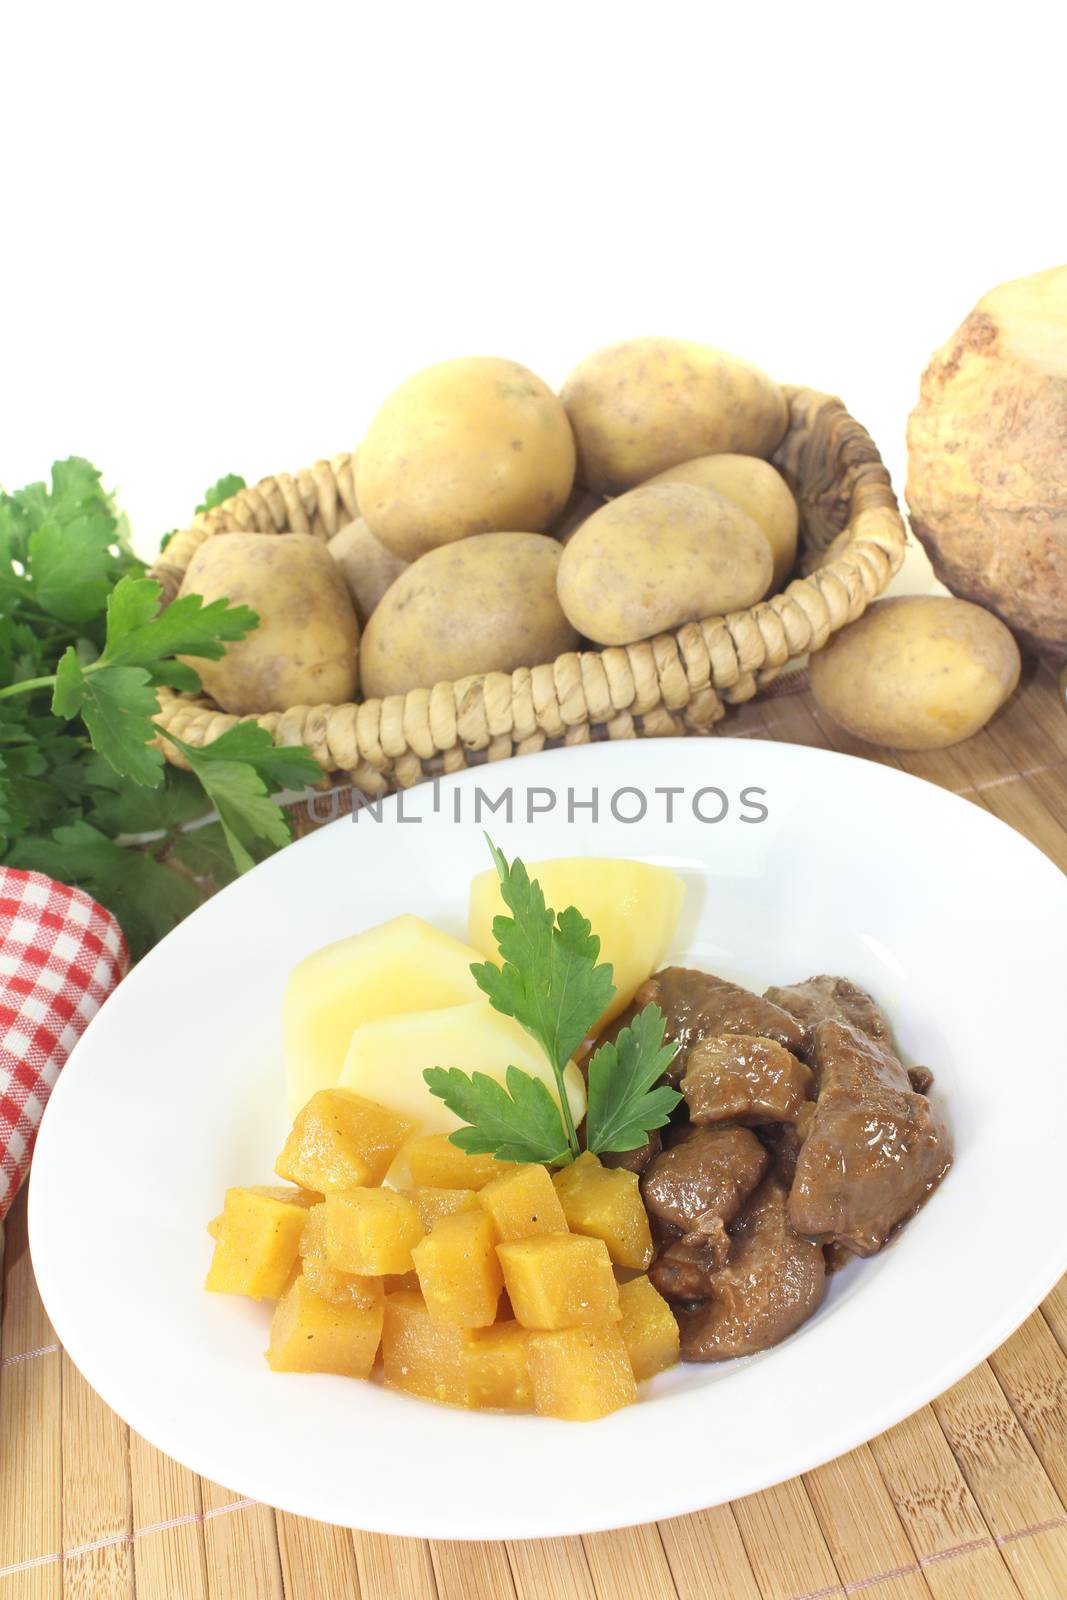 Venison goulash with rutabaga and potatoes by discovery